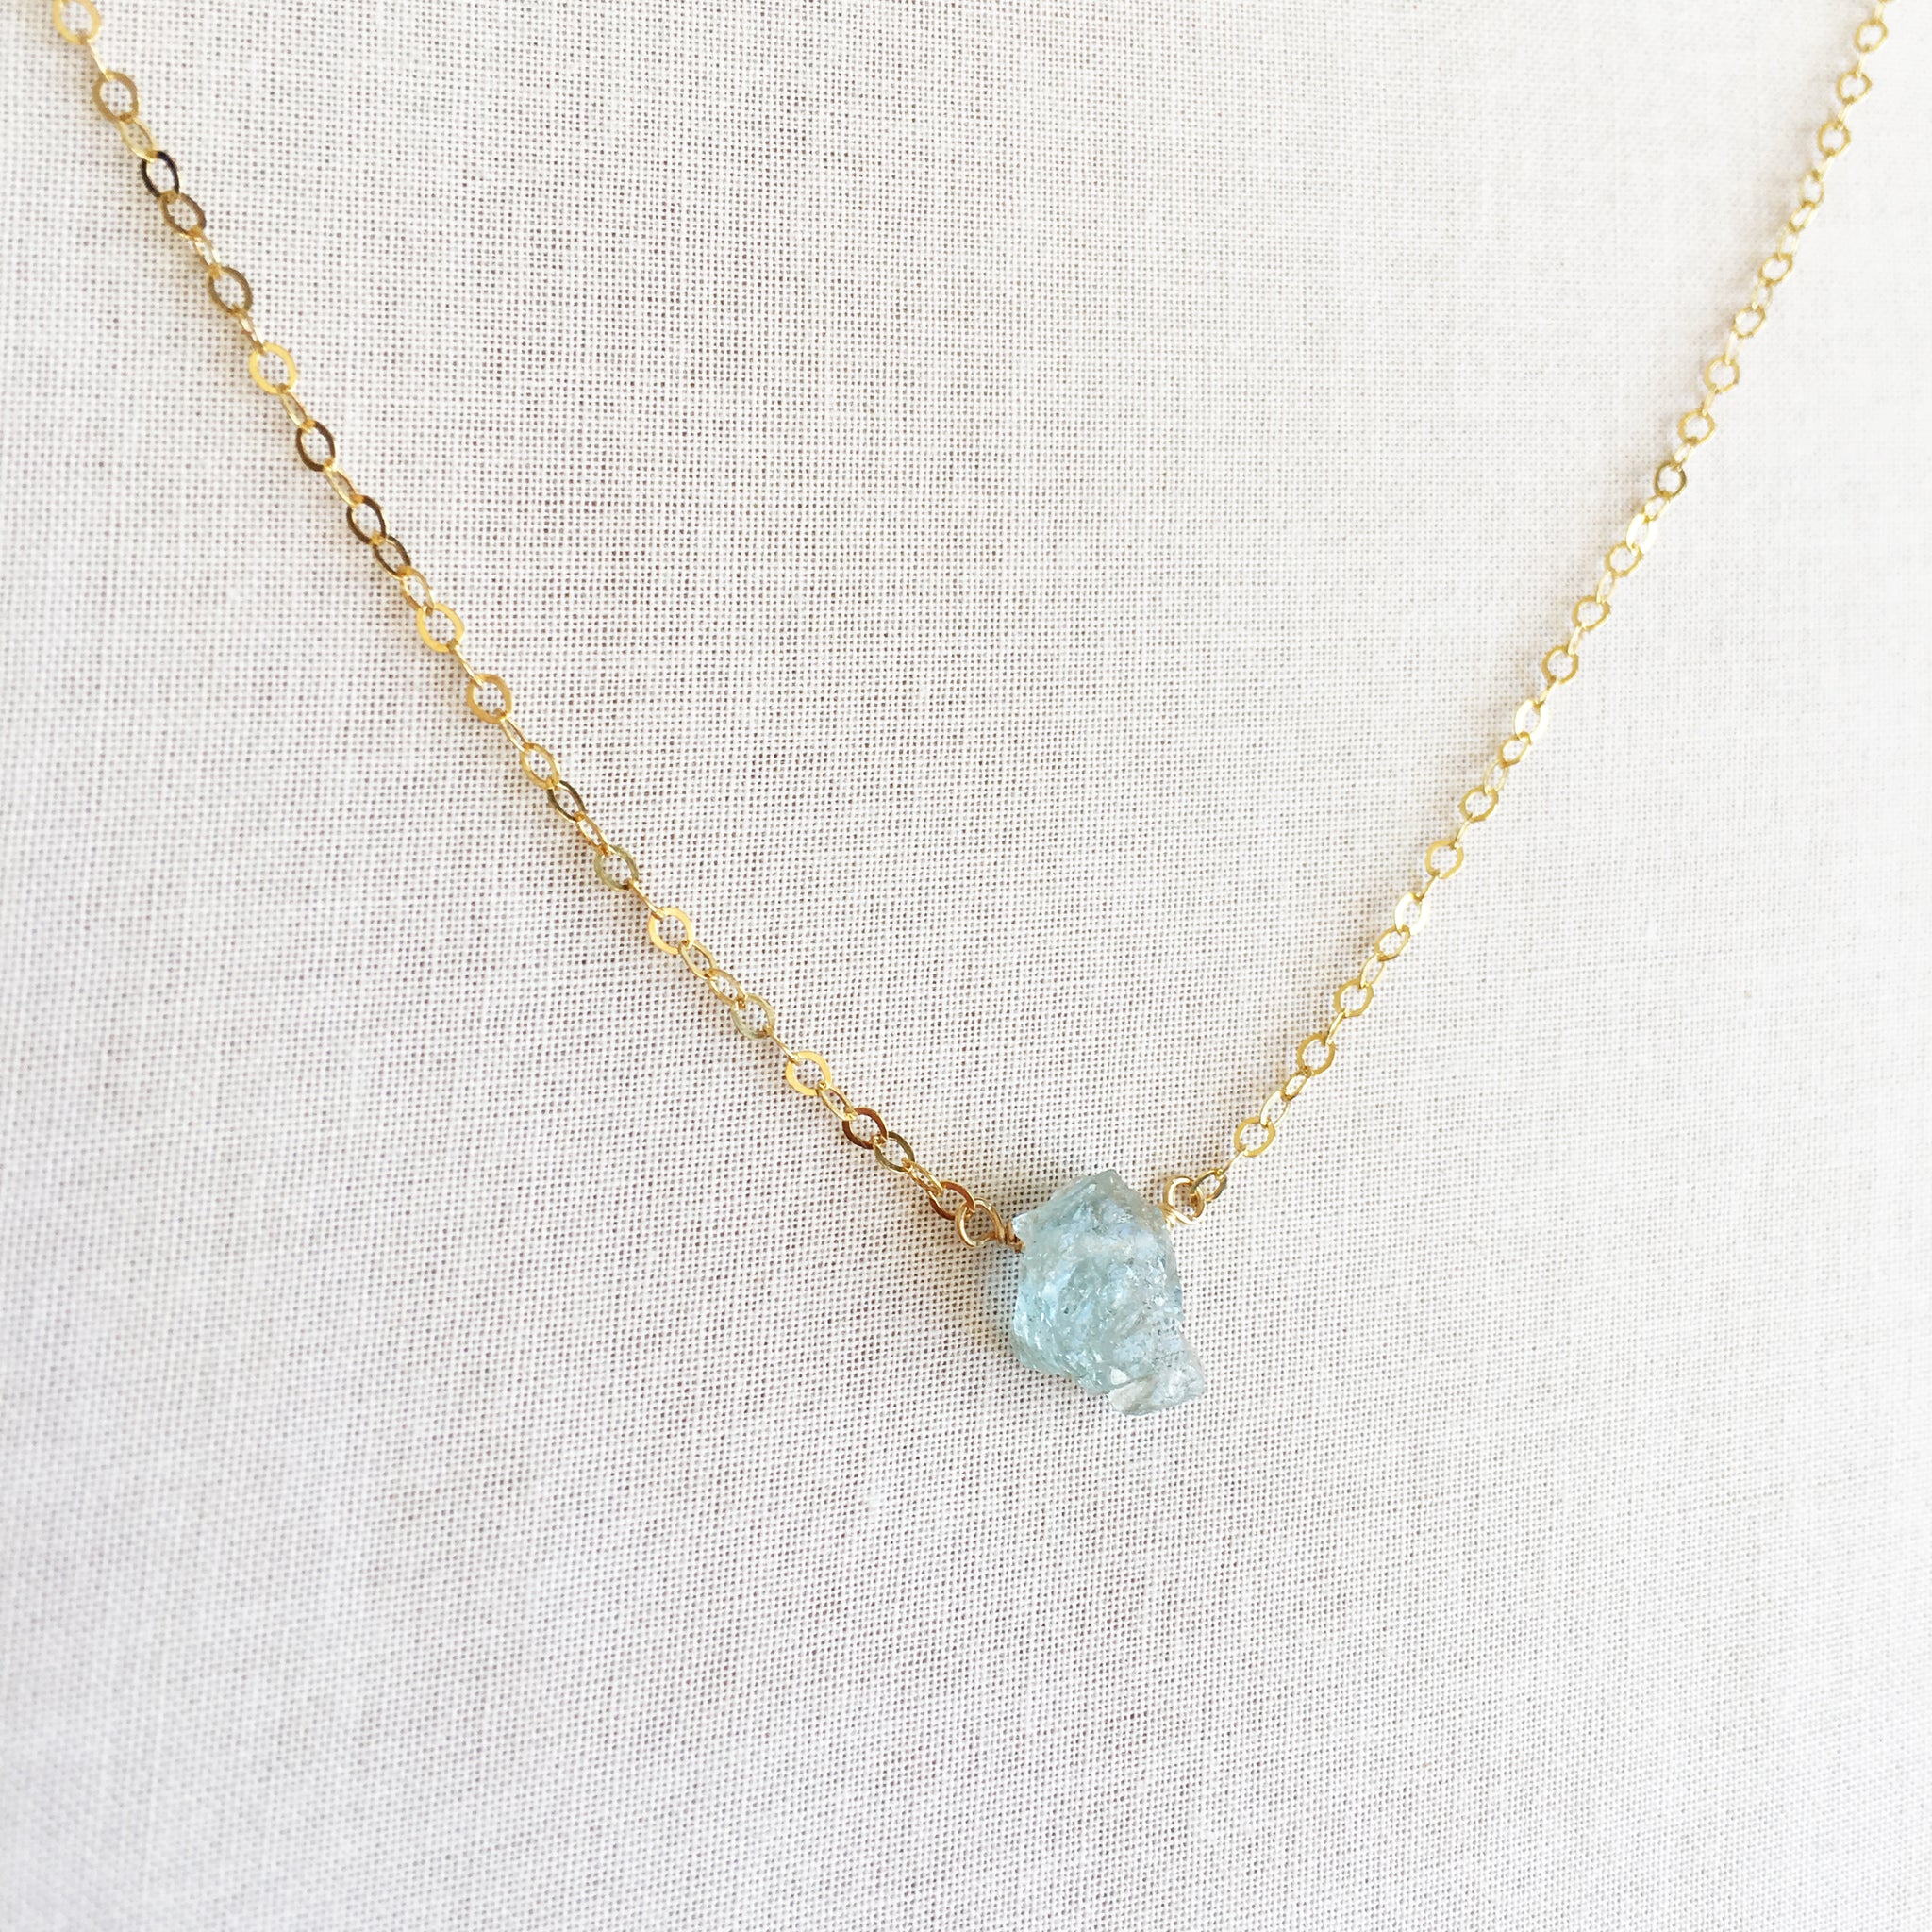 This is a Raw Aquamarine necklace that's made of 14k gold chain and raw Aquamarine. 